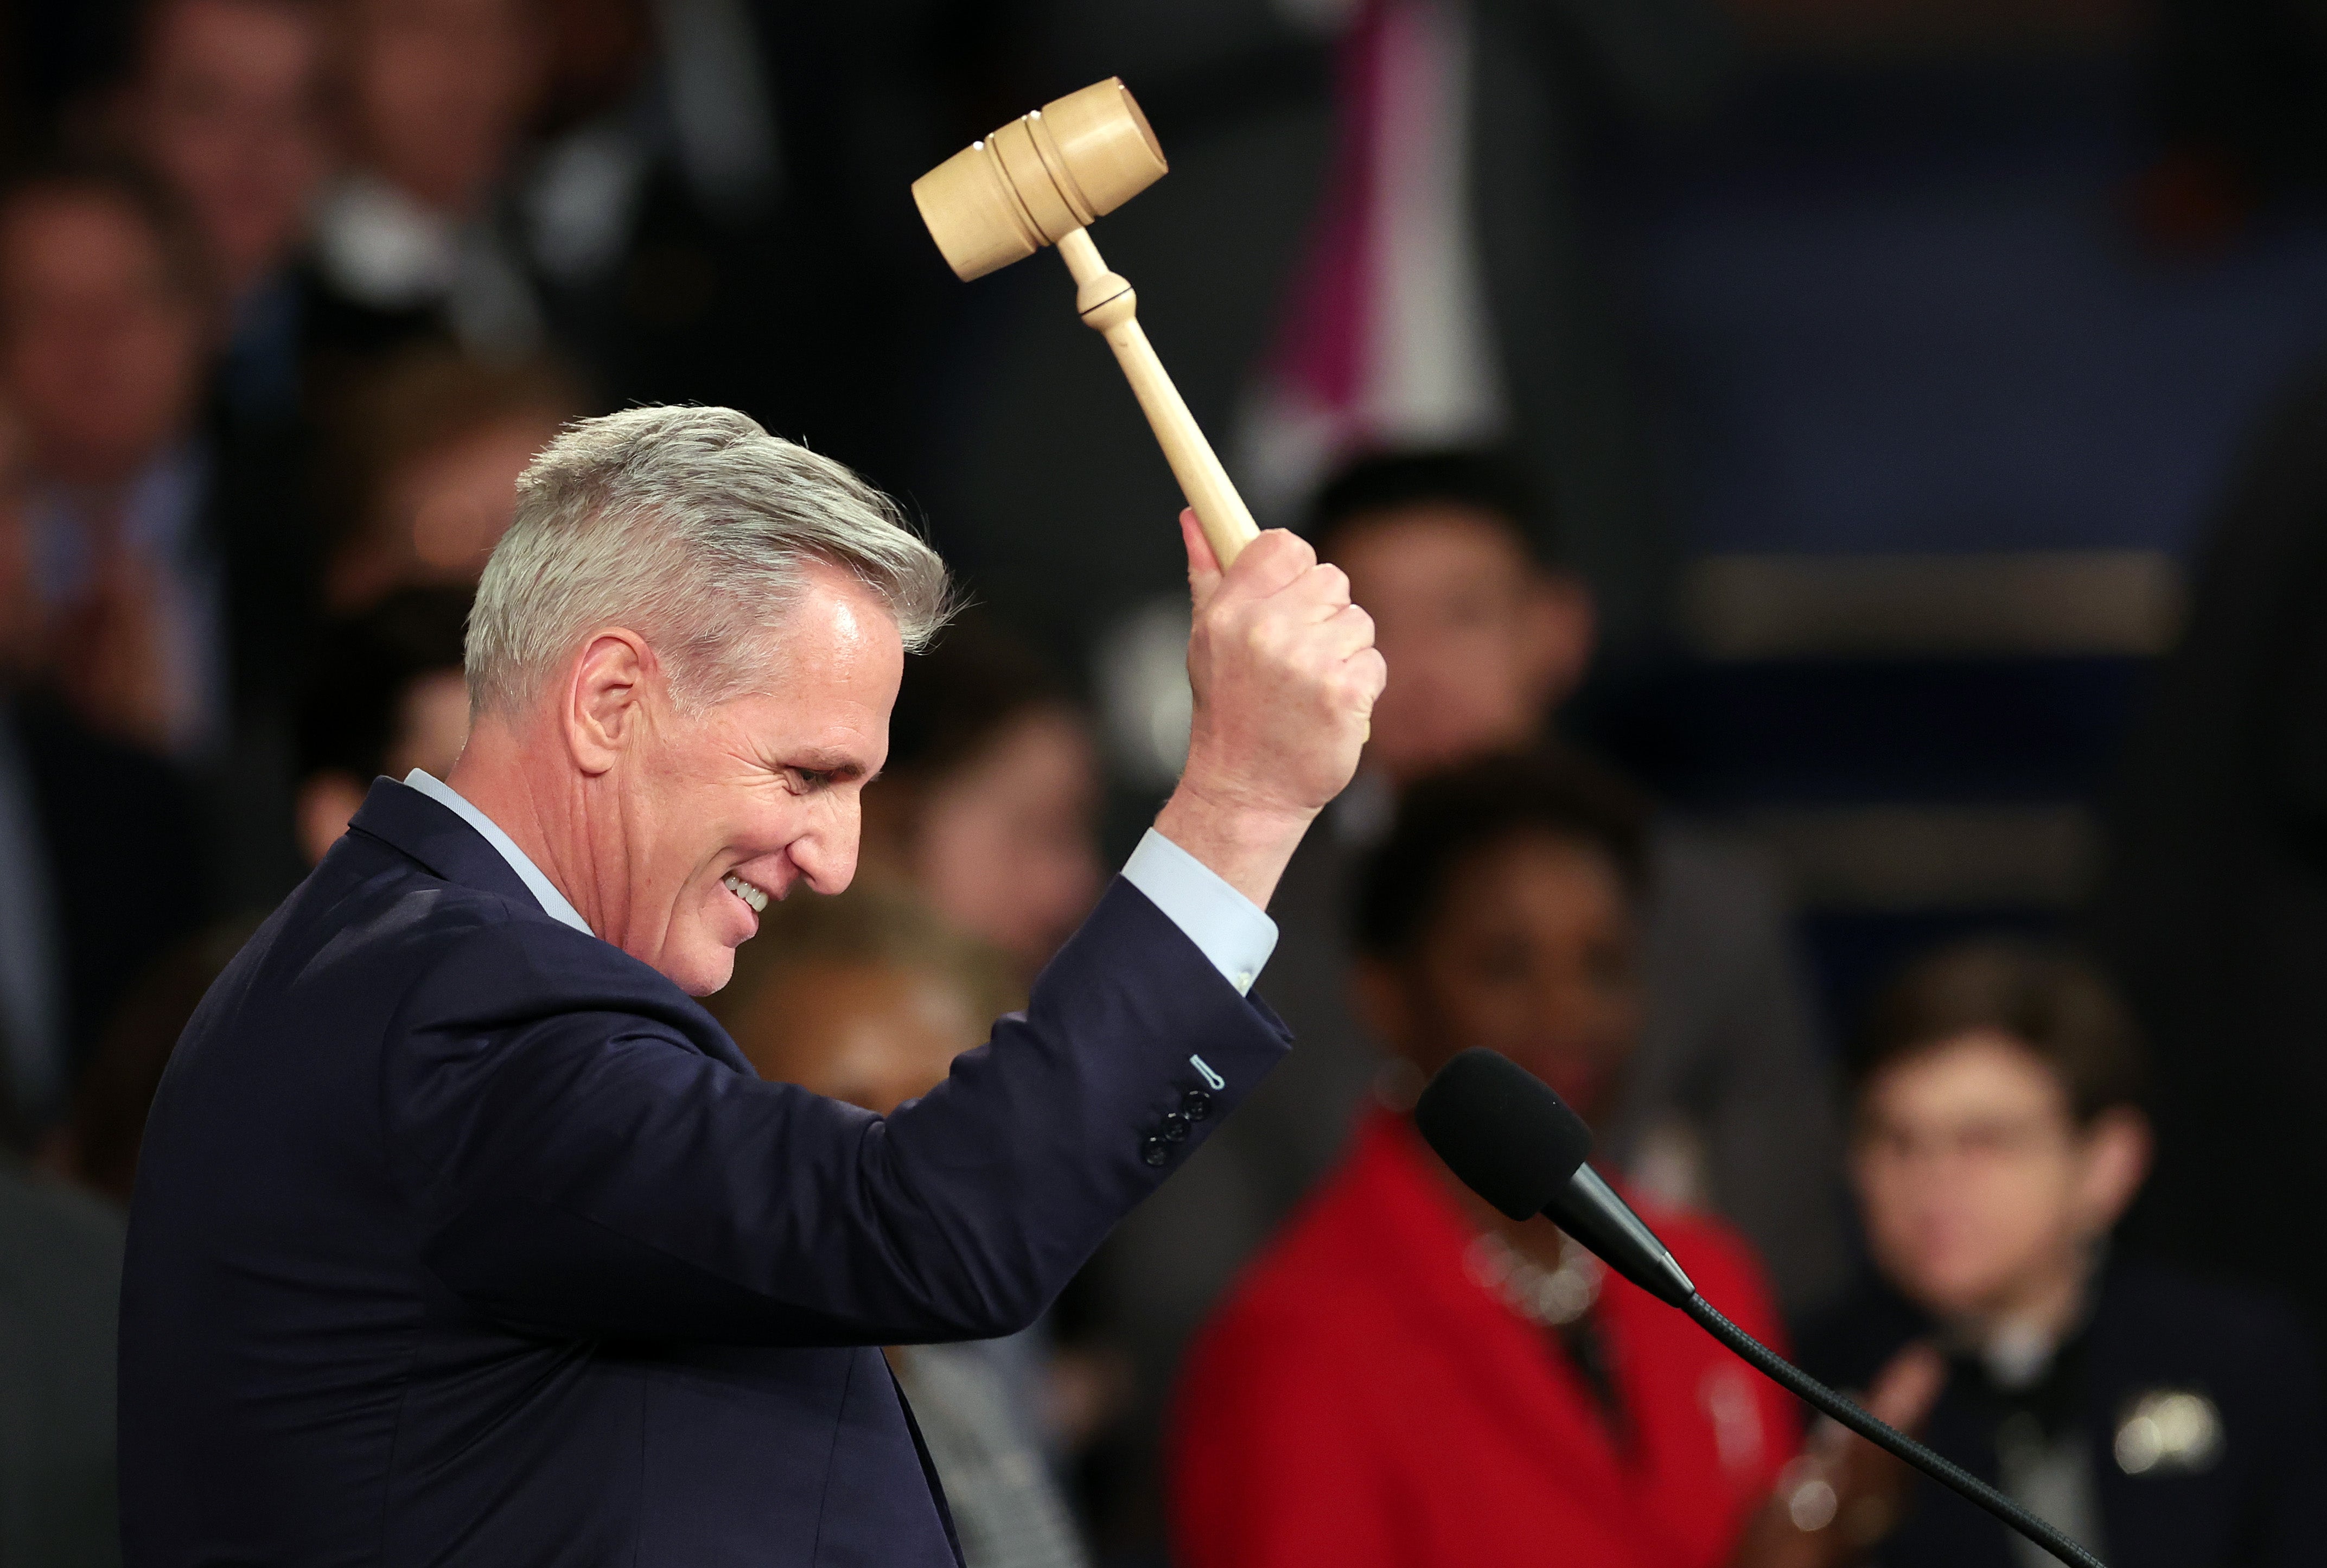 Kevin McCarthy celebrates with the gavel after being elected as speaker of the House of Representatives